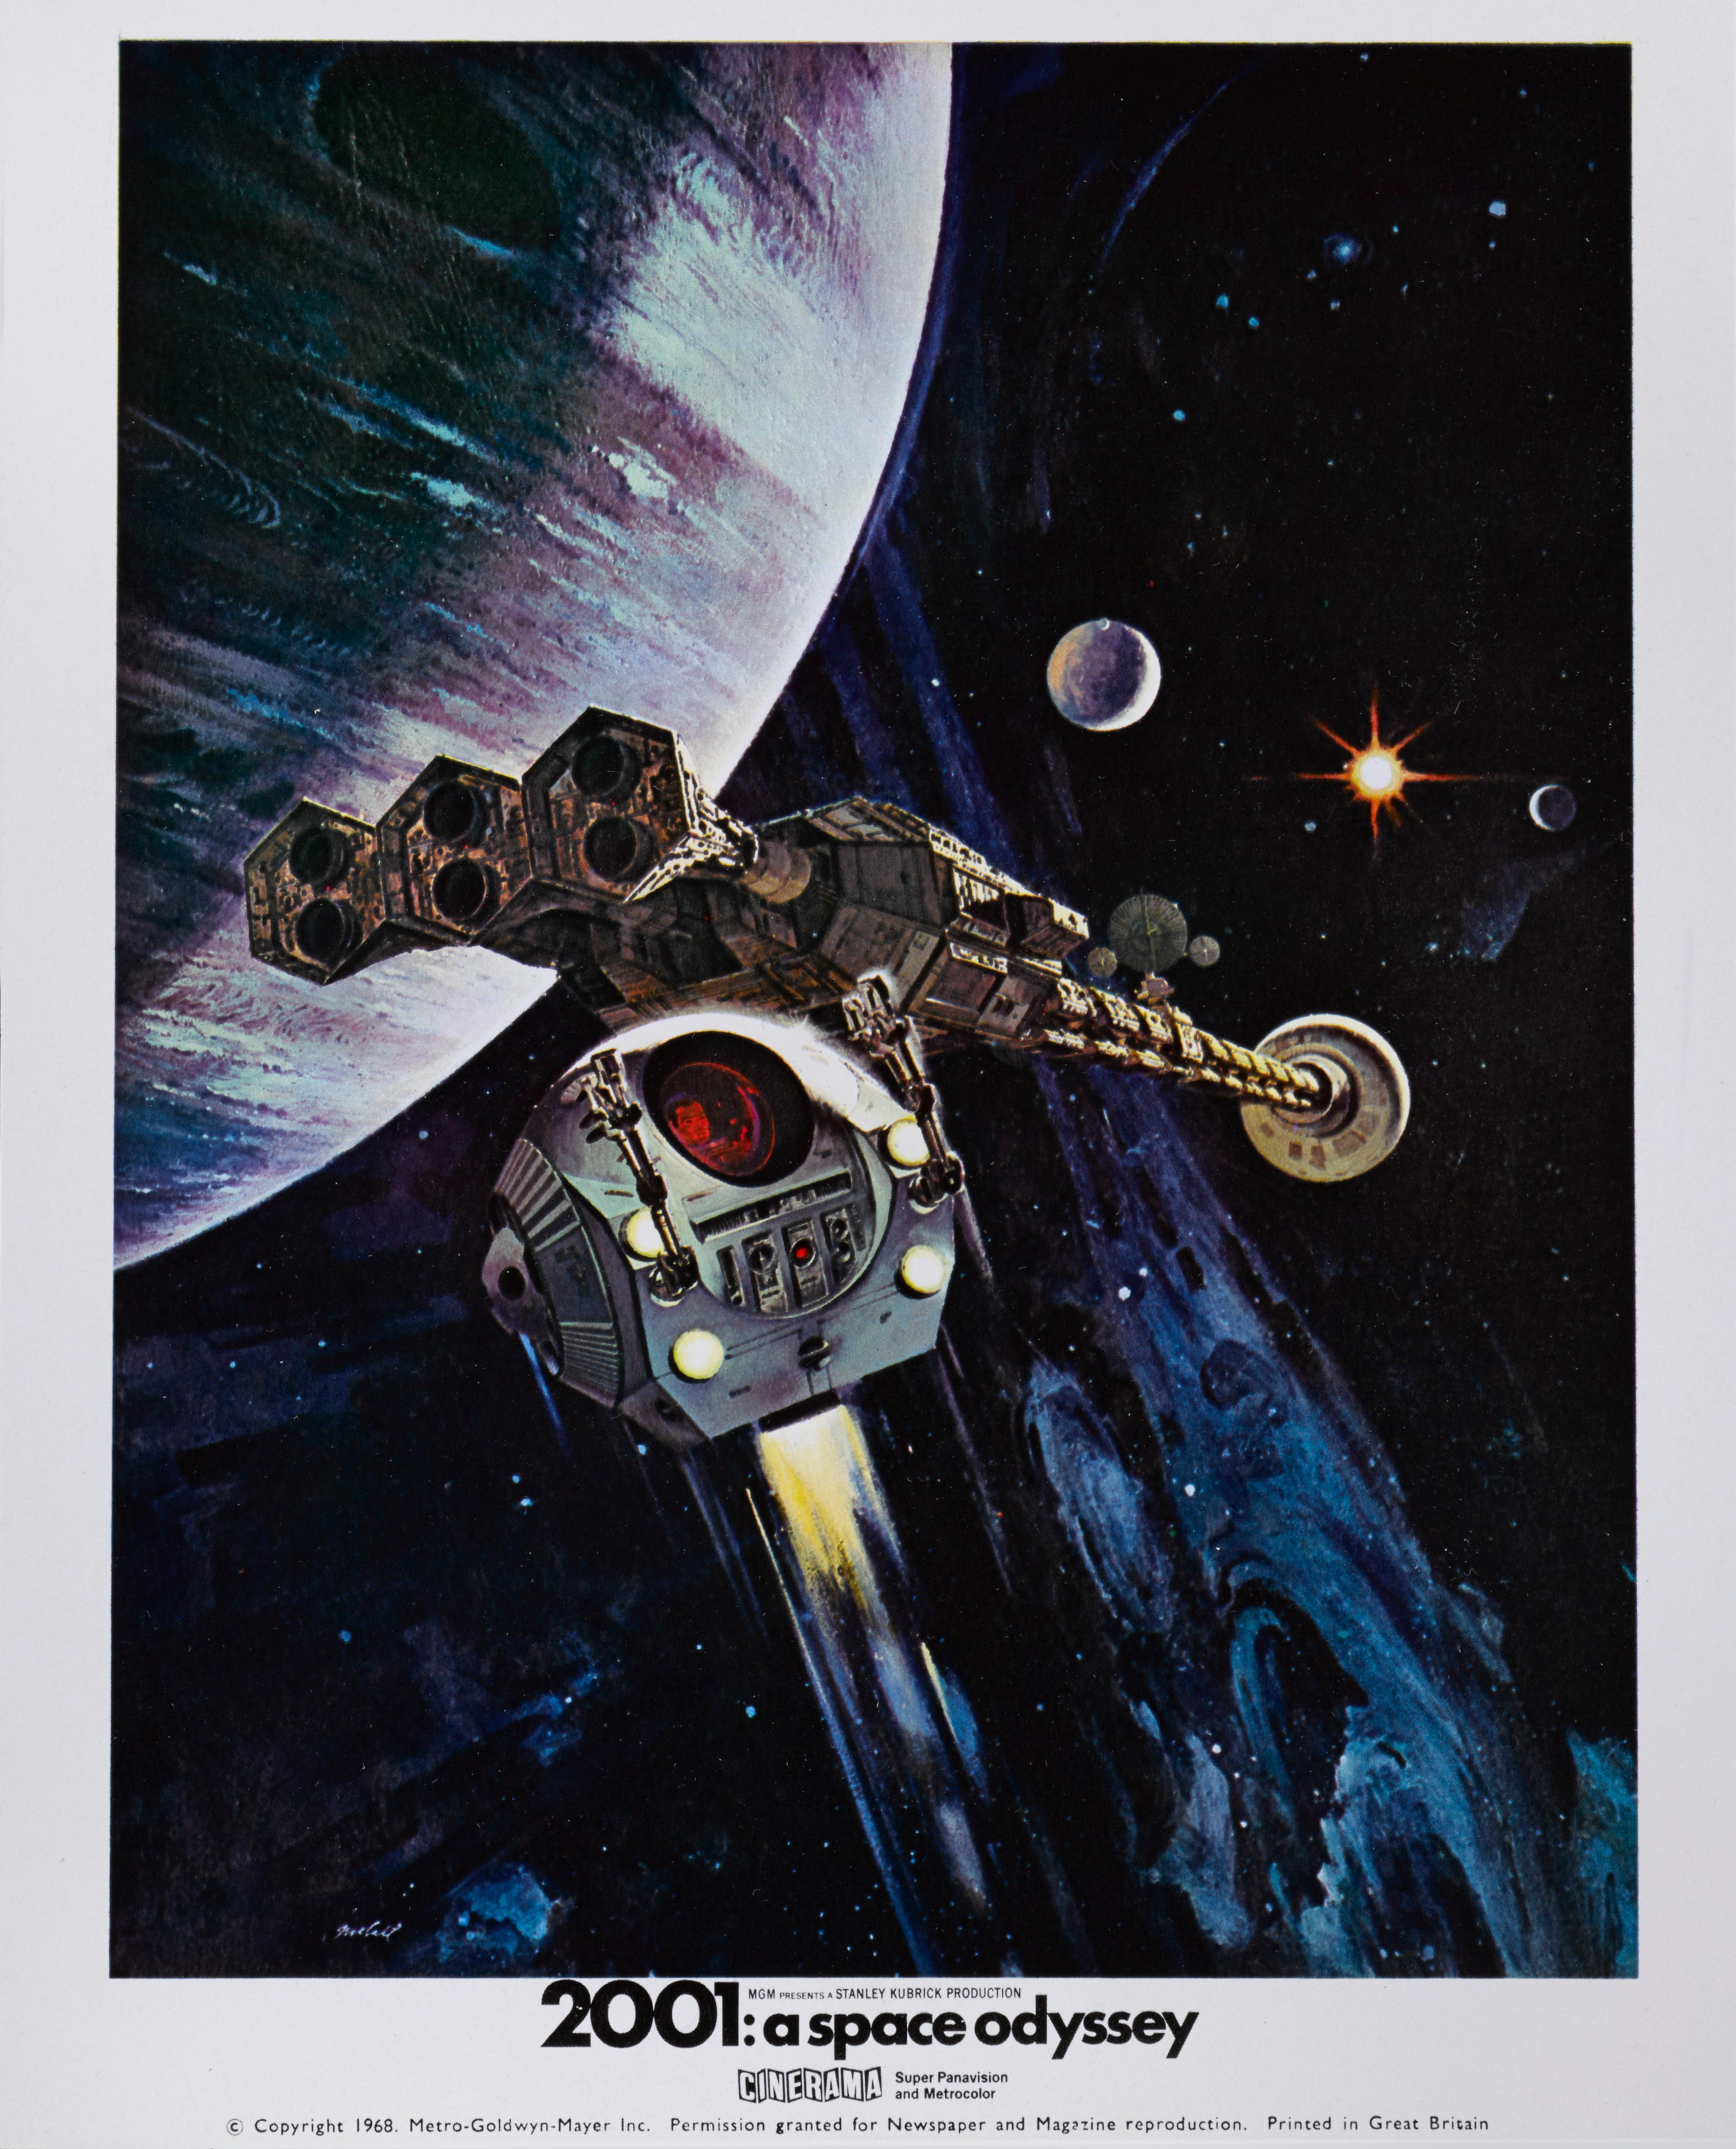 Original color production still for the Cinerama release of Stanley Kubrick's 2001: A Space Odyssey.
The Cinerama release stills are much harder to find and more desirable.
This piece would be packed in strong card and sent out flat.
   